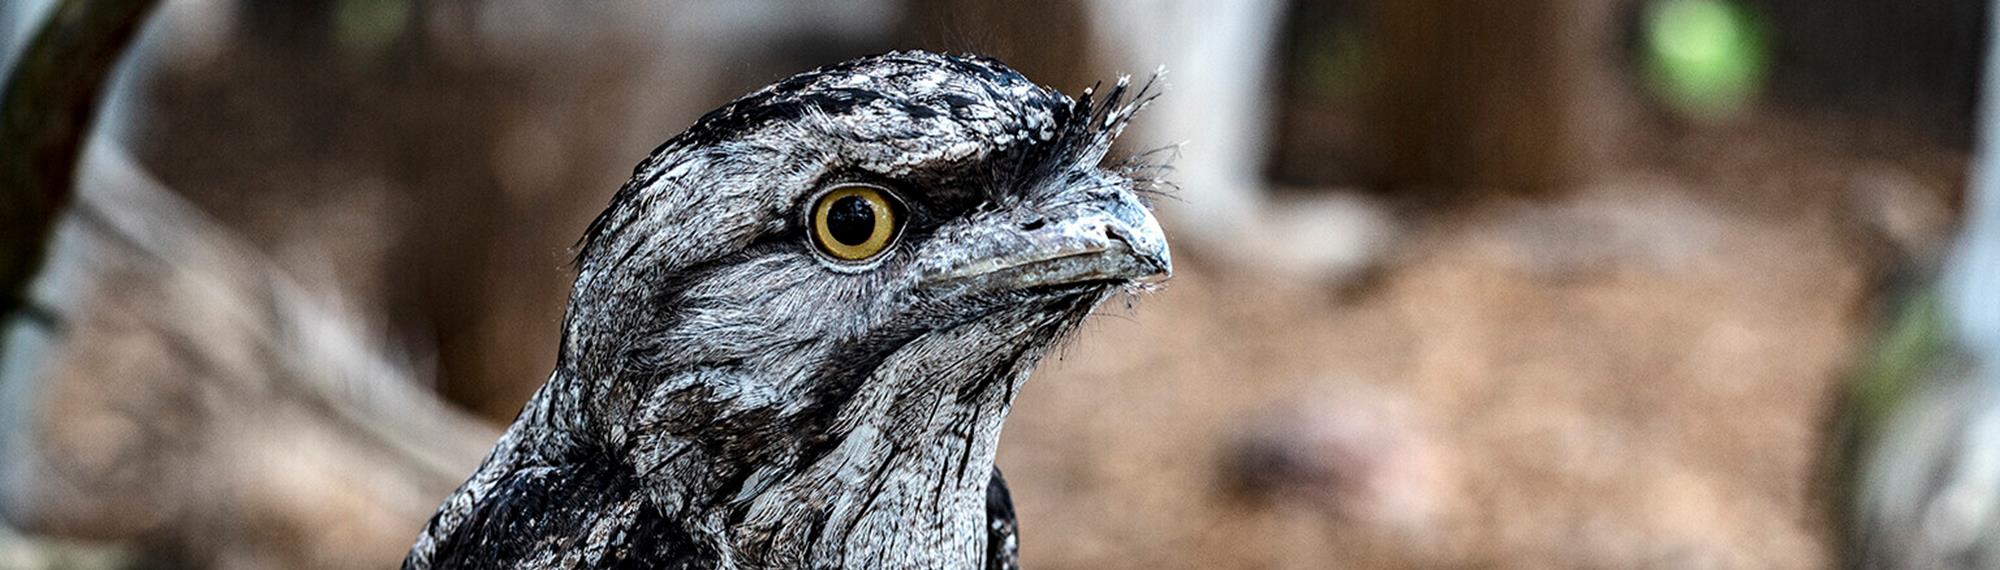 Close up of a Tawny Frogmouth bird with yellow eyes and a pointed beak